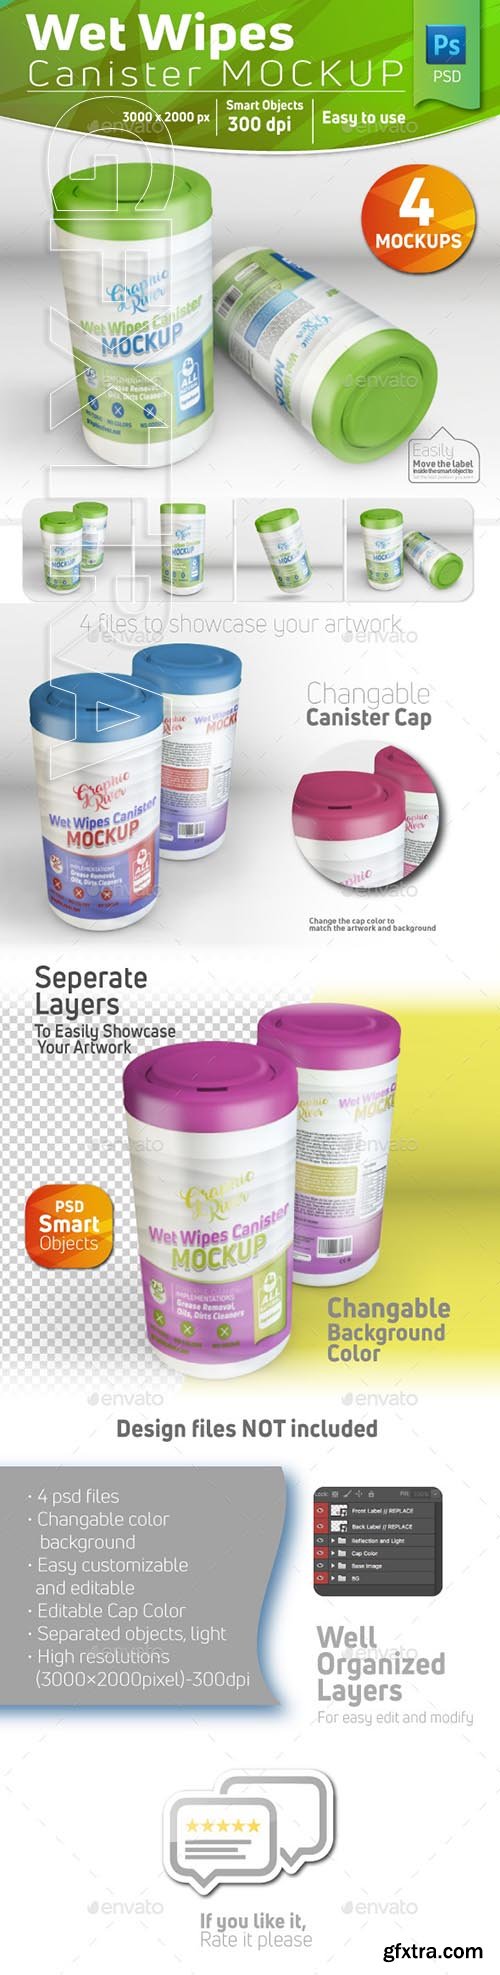 GraphicRiver - Wet Wipes Canister Mockup 21650442